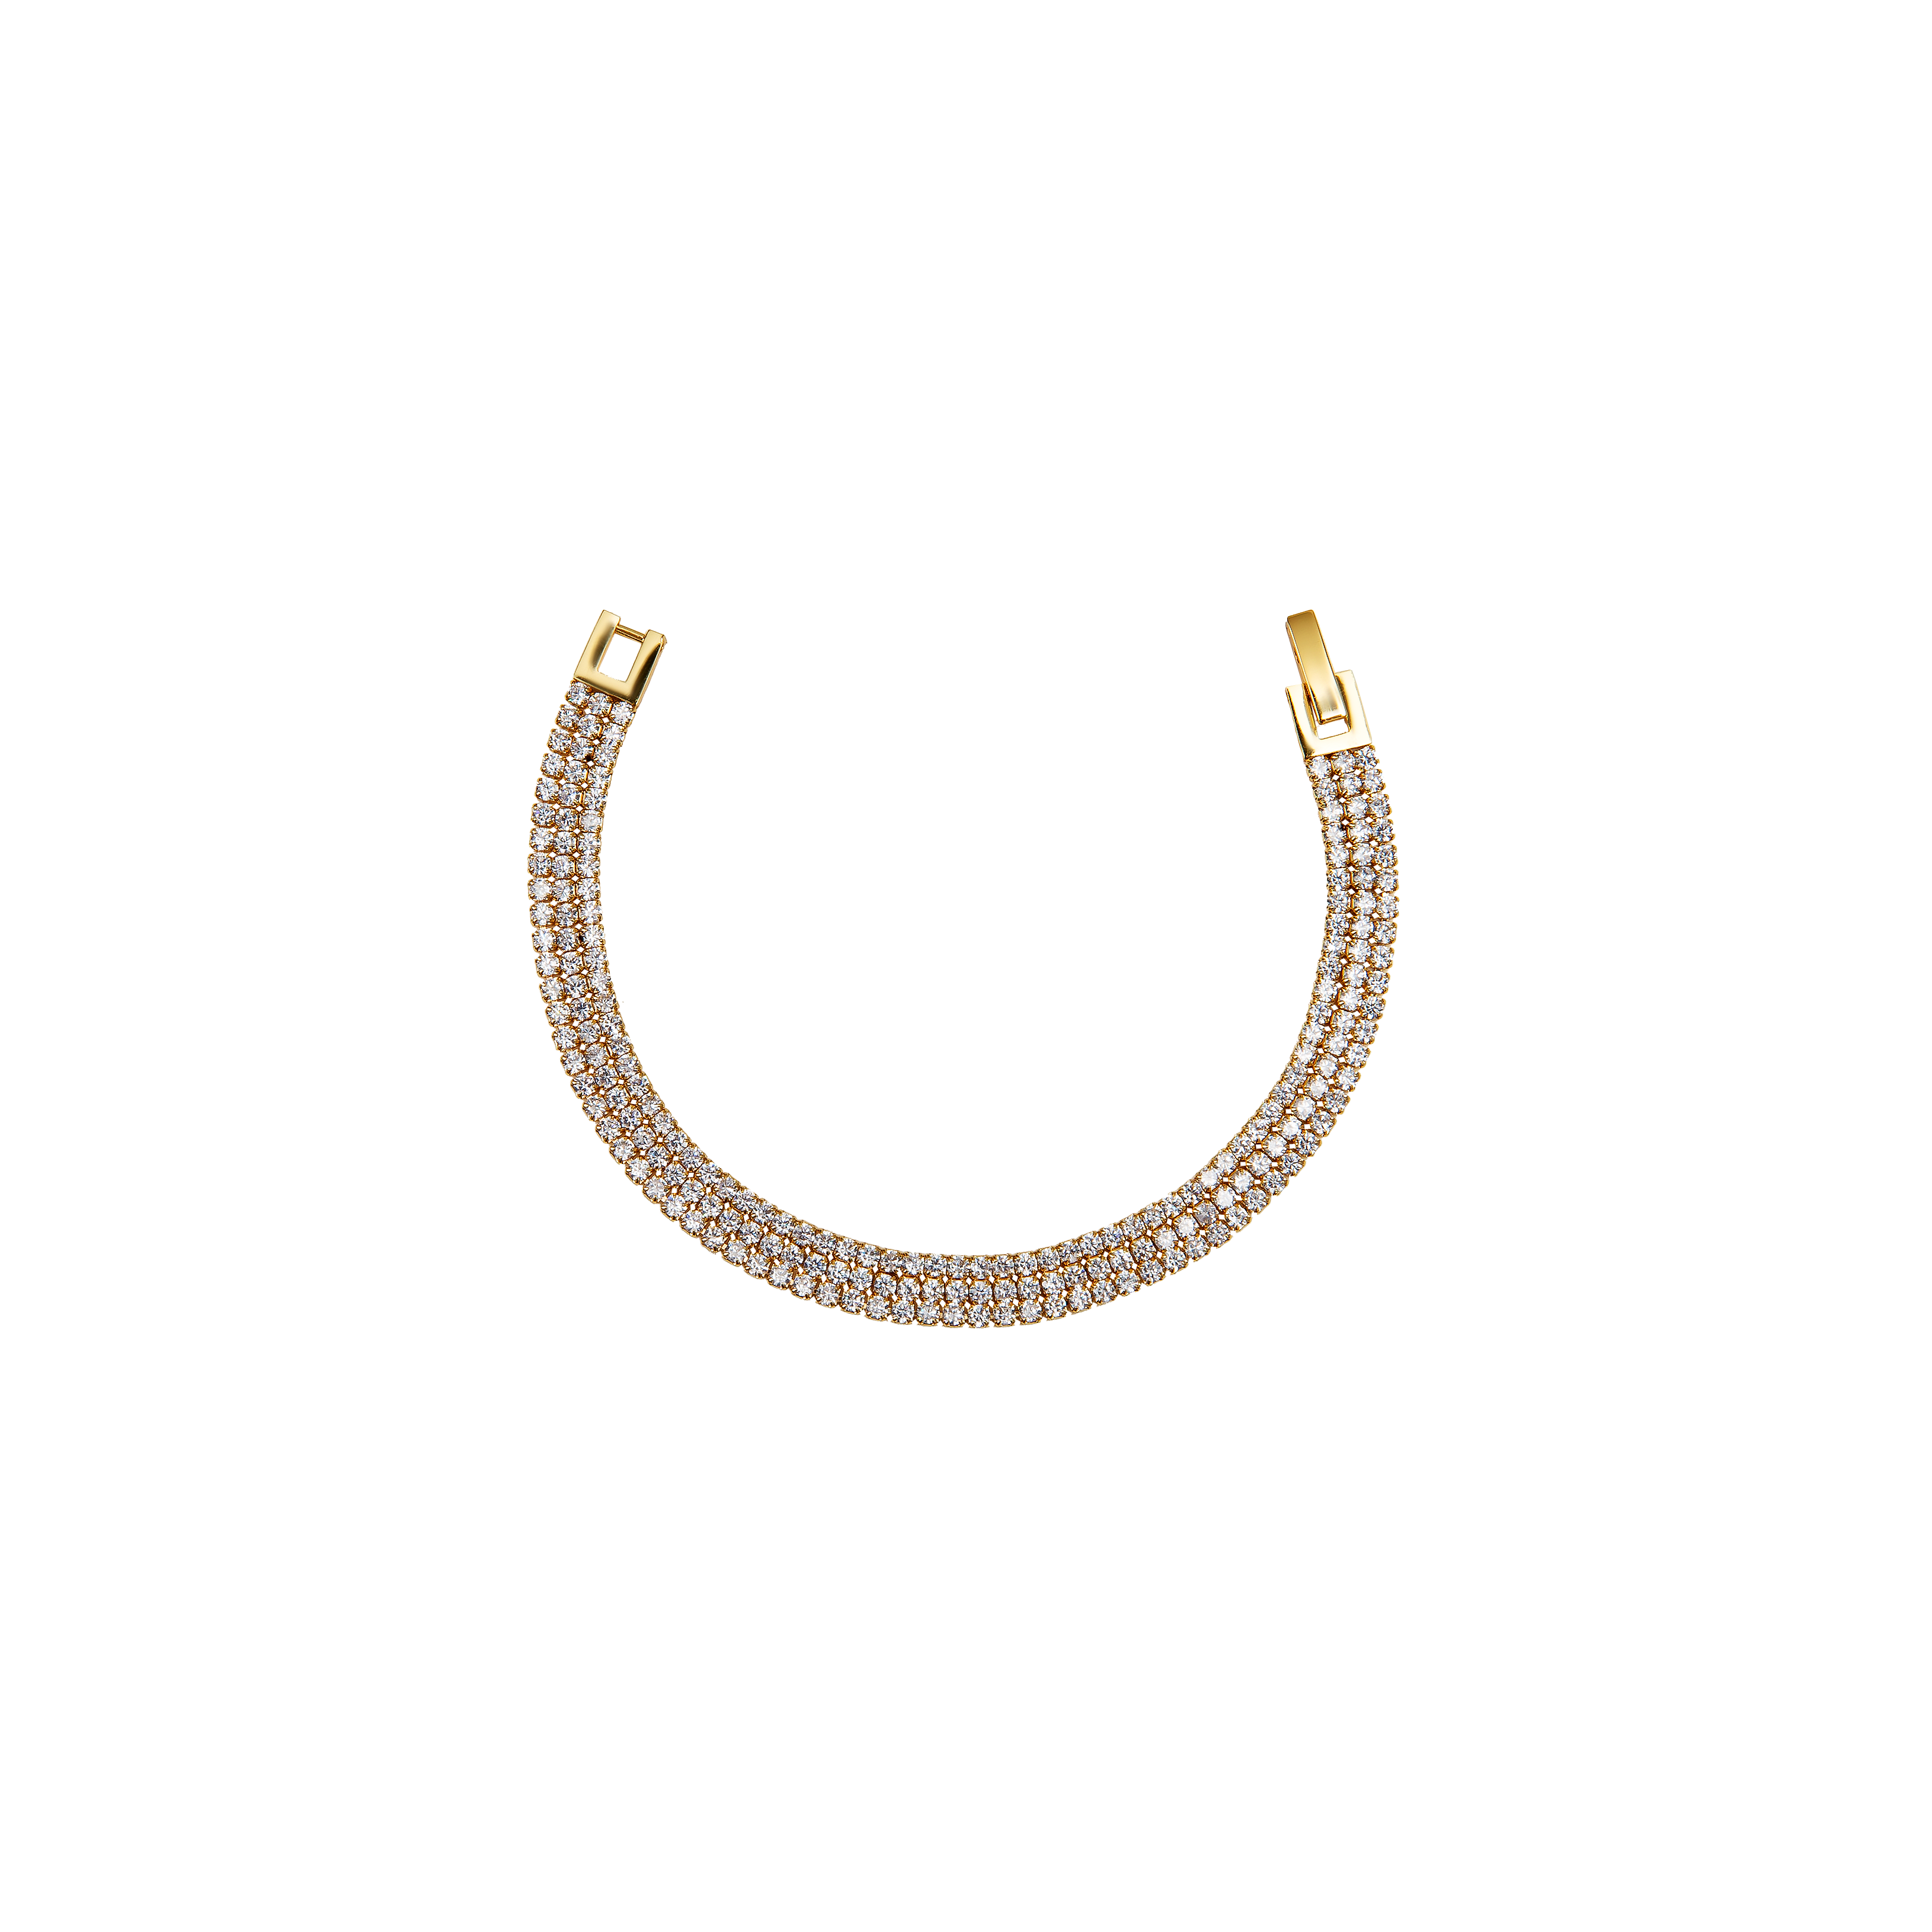 Add a shine to your outfit with this sparkly bracelet. A fashionable and chic complement to any evening dress or professional wear. 18k gold plated on stainless steel. Length: 7”